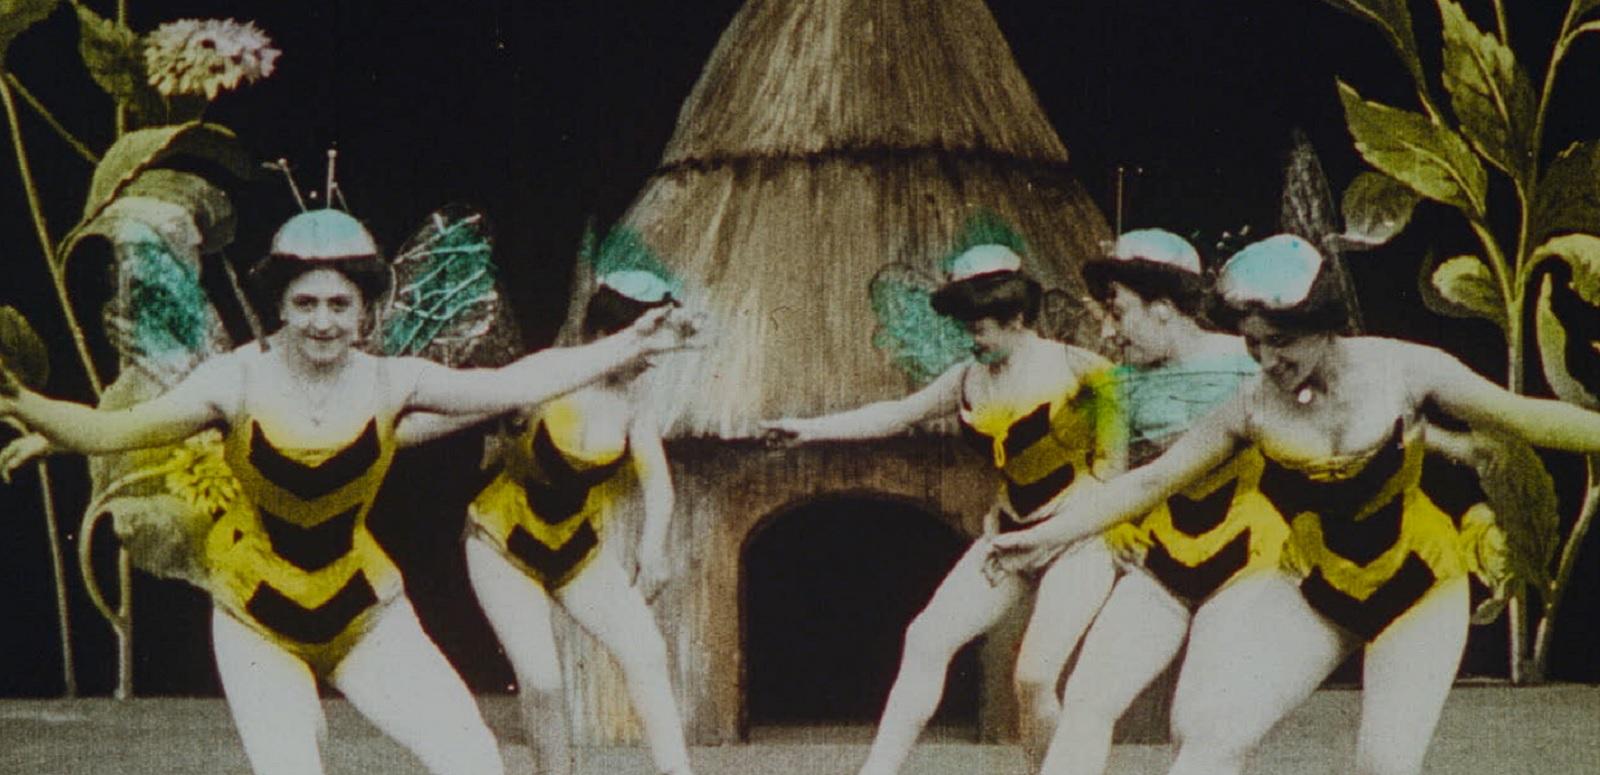 Five women dressed as bees, dancing in front of a hut, with giant flowers in the background